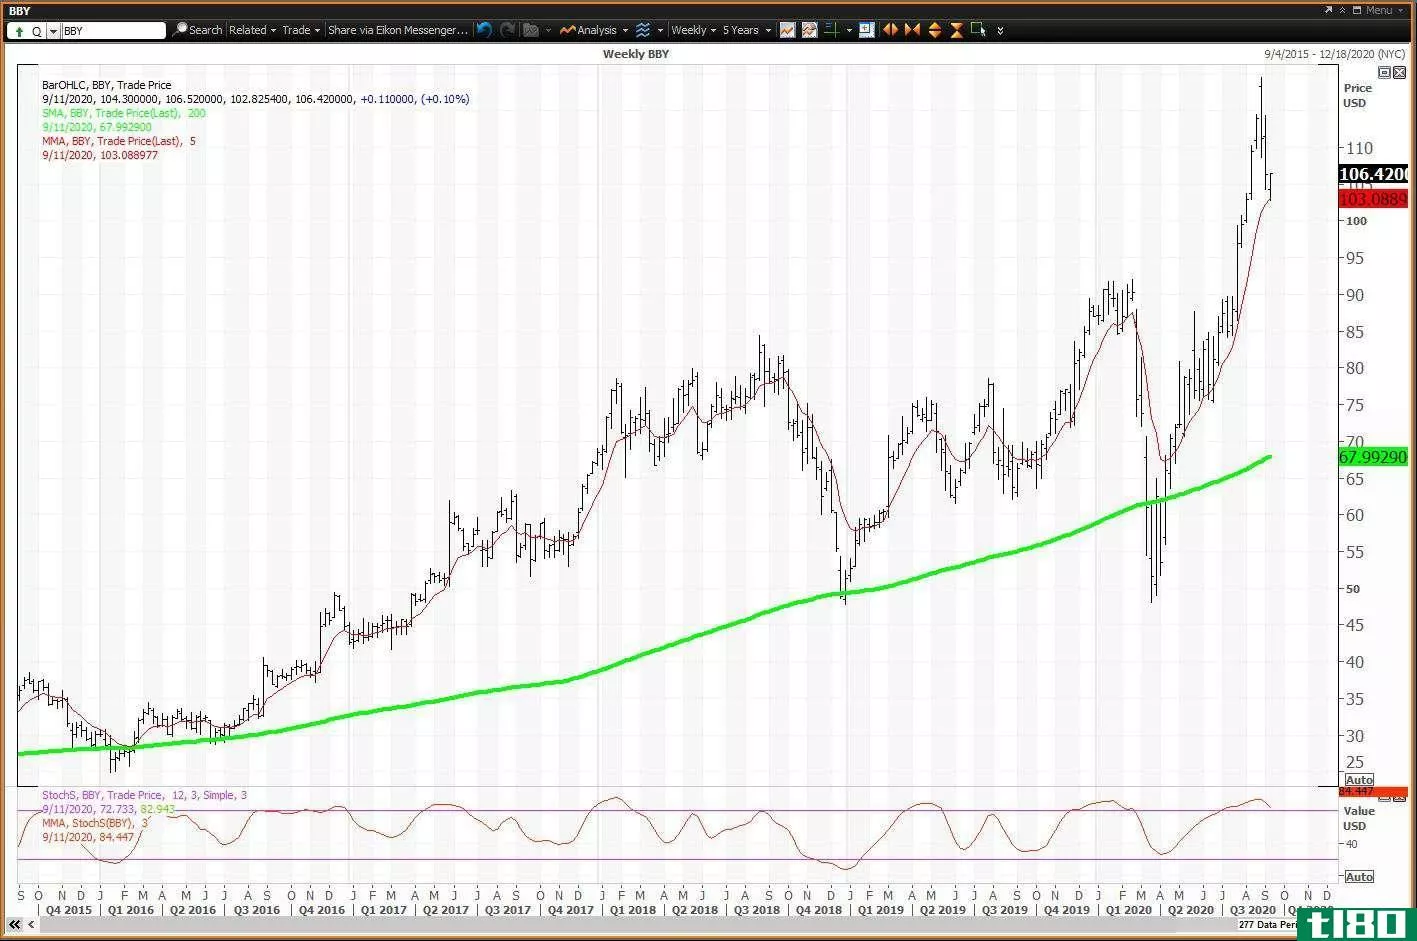 Weekly chart showing the share price performance of Best Buy Co, Inc. (BBY)